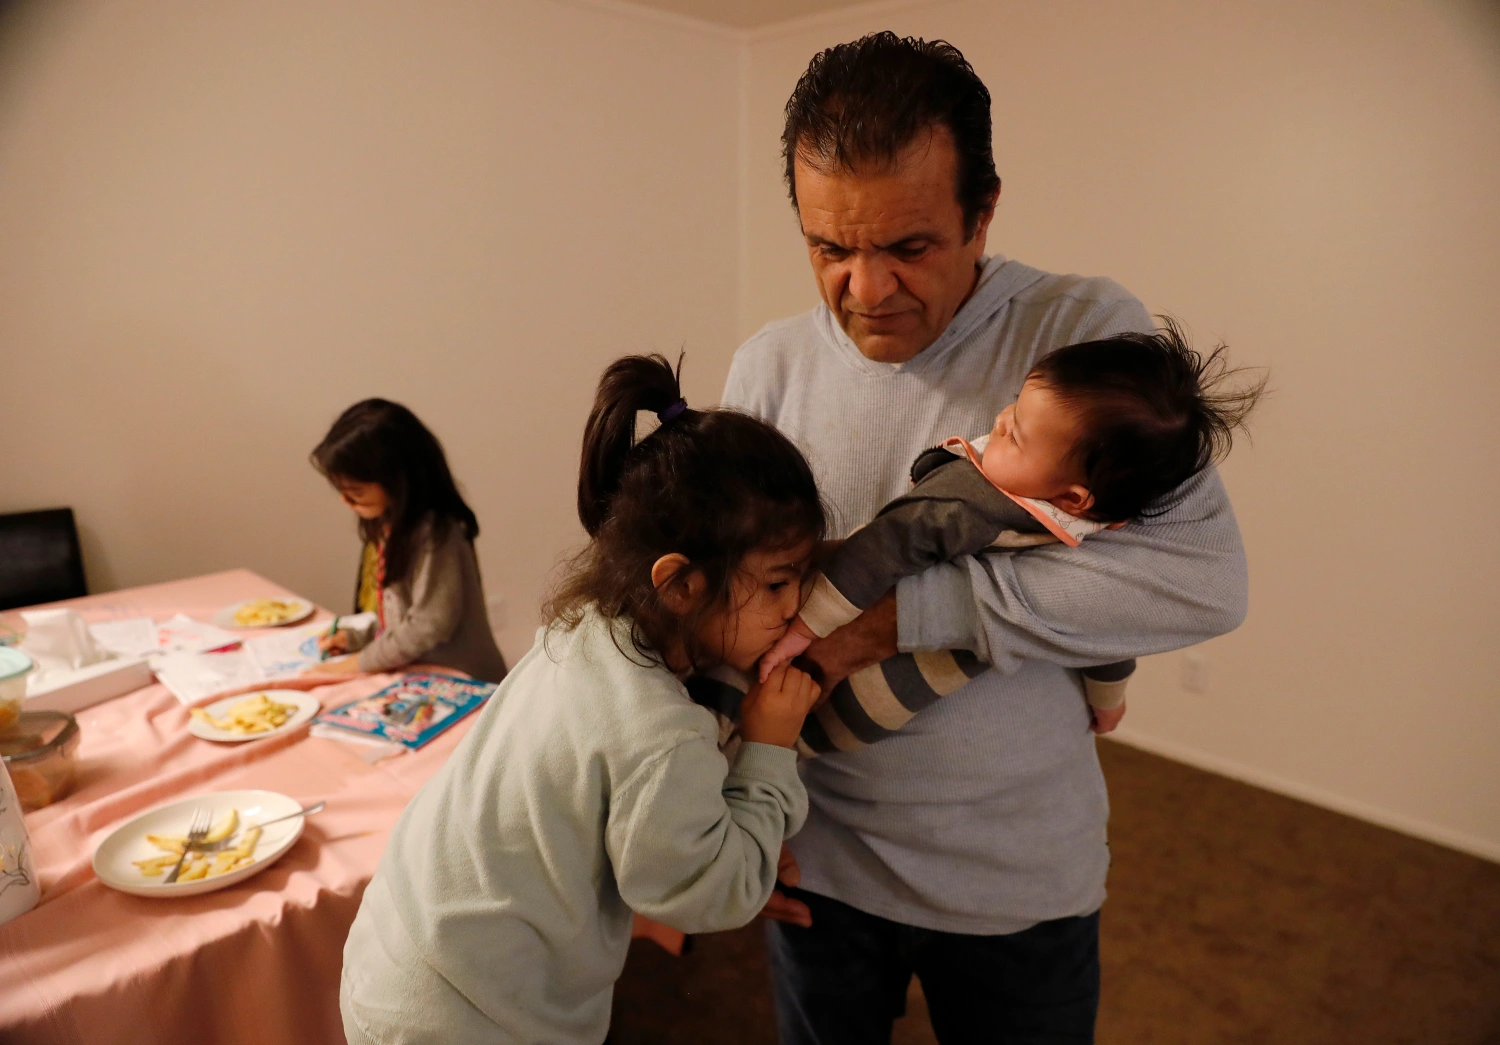 A man is holding a baby, a young girl kisses the baby’s hand. Another girl is in the background at a table.